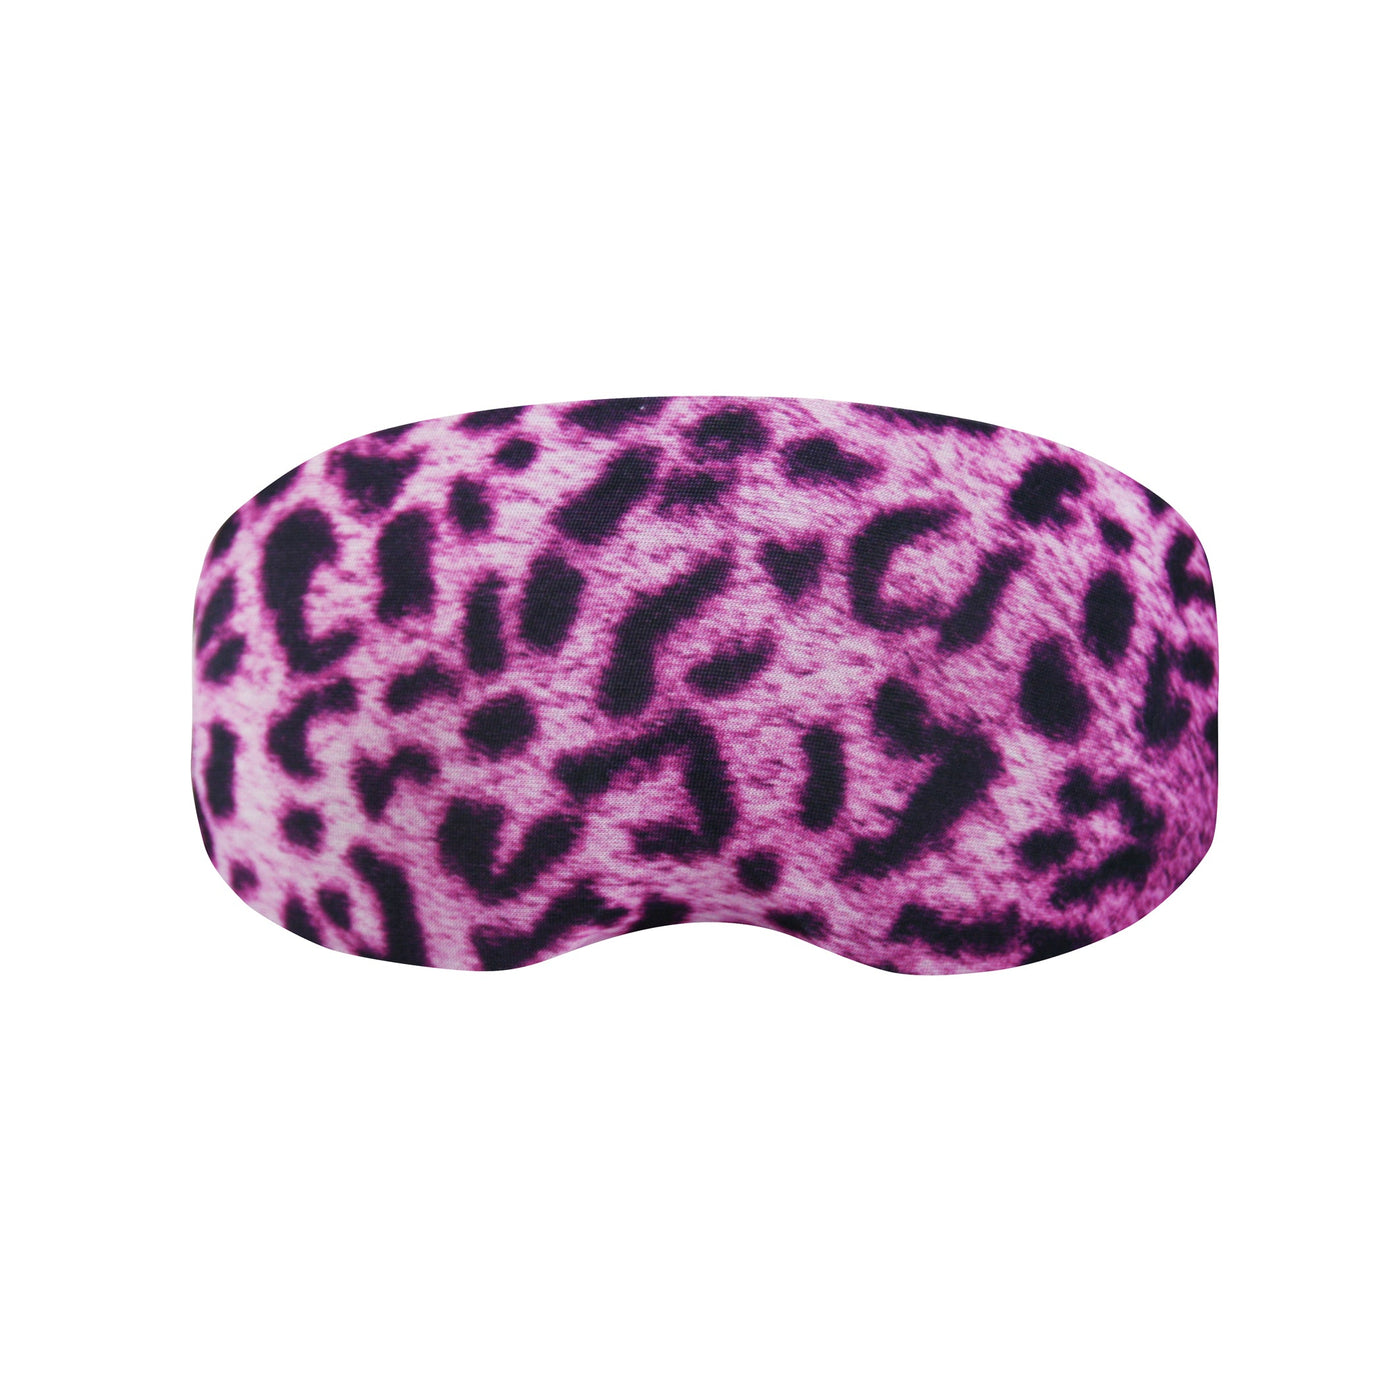 Coolcasc Coolmasc Goggle Cover Pink Leopard